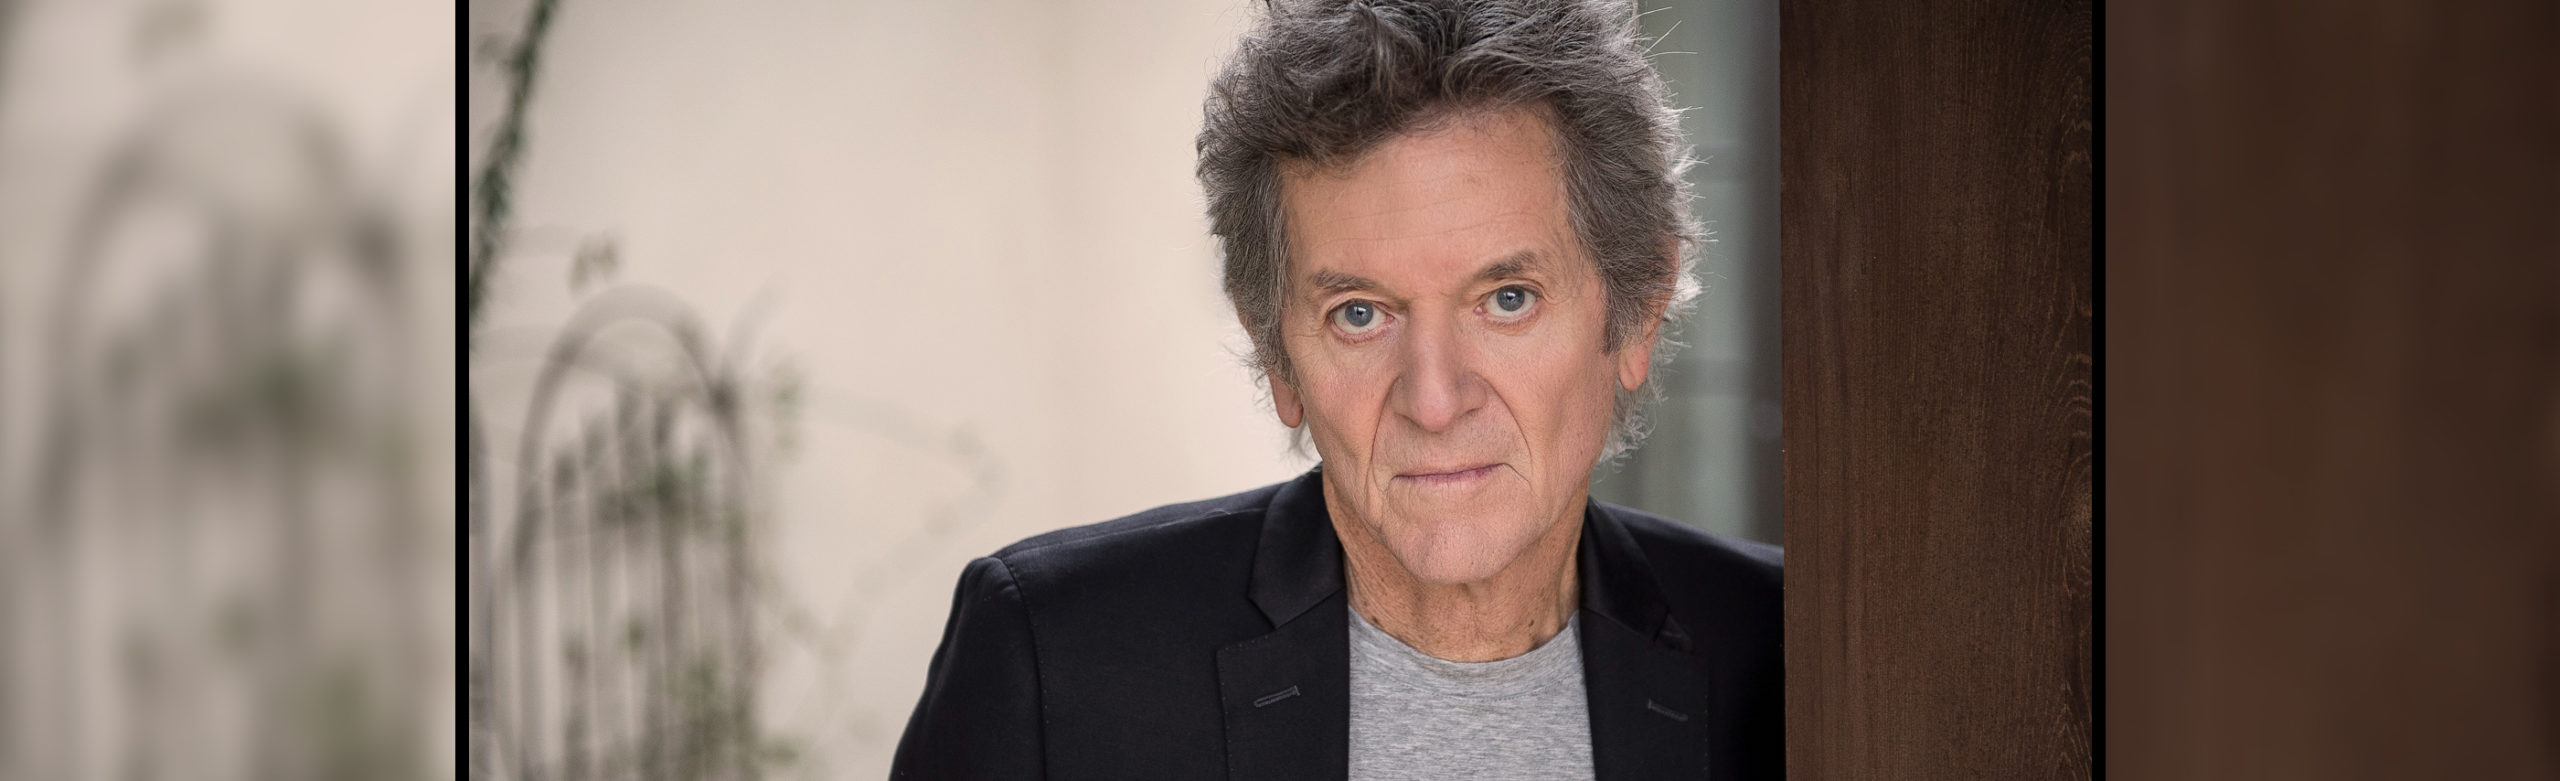 Rodney Crowell Tickets + Signed Copy of “Acoustic Classic” Giveaway Image